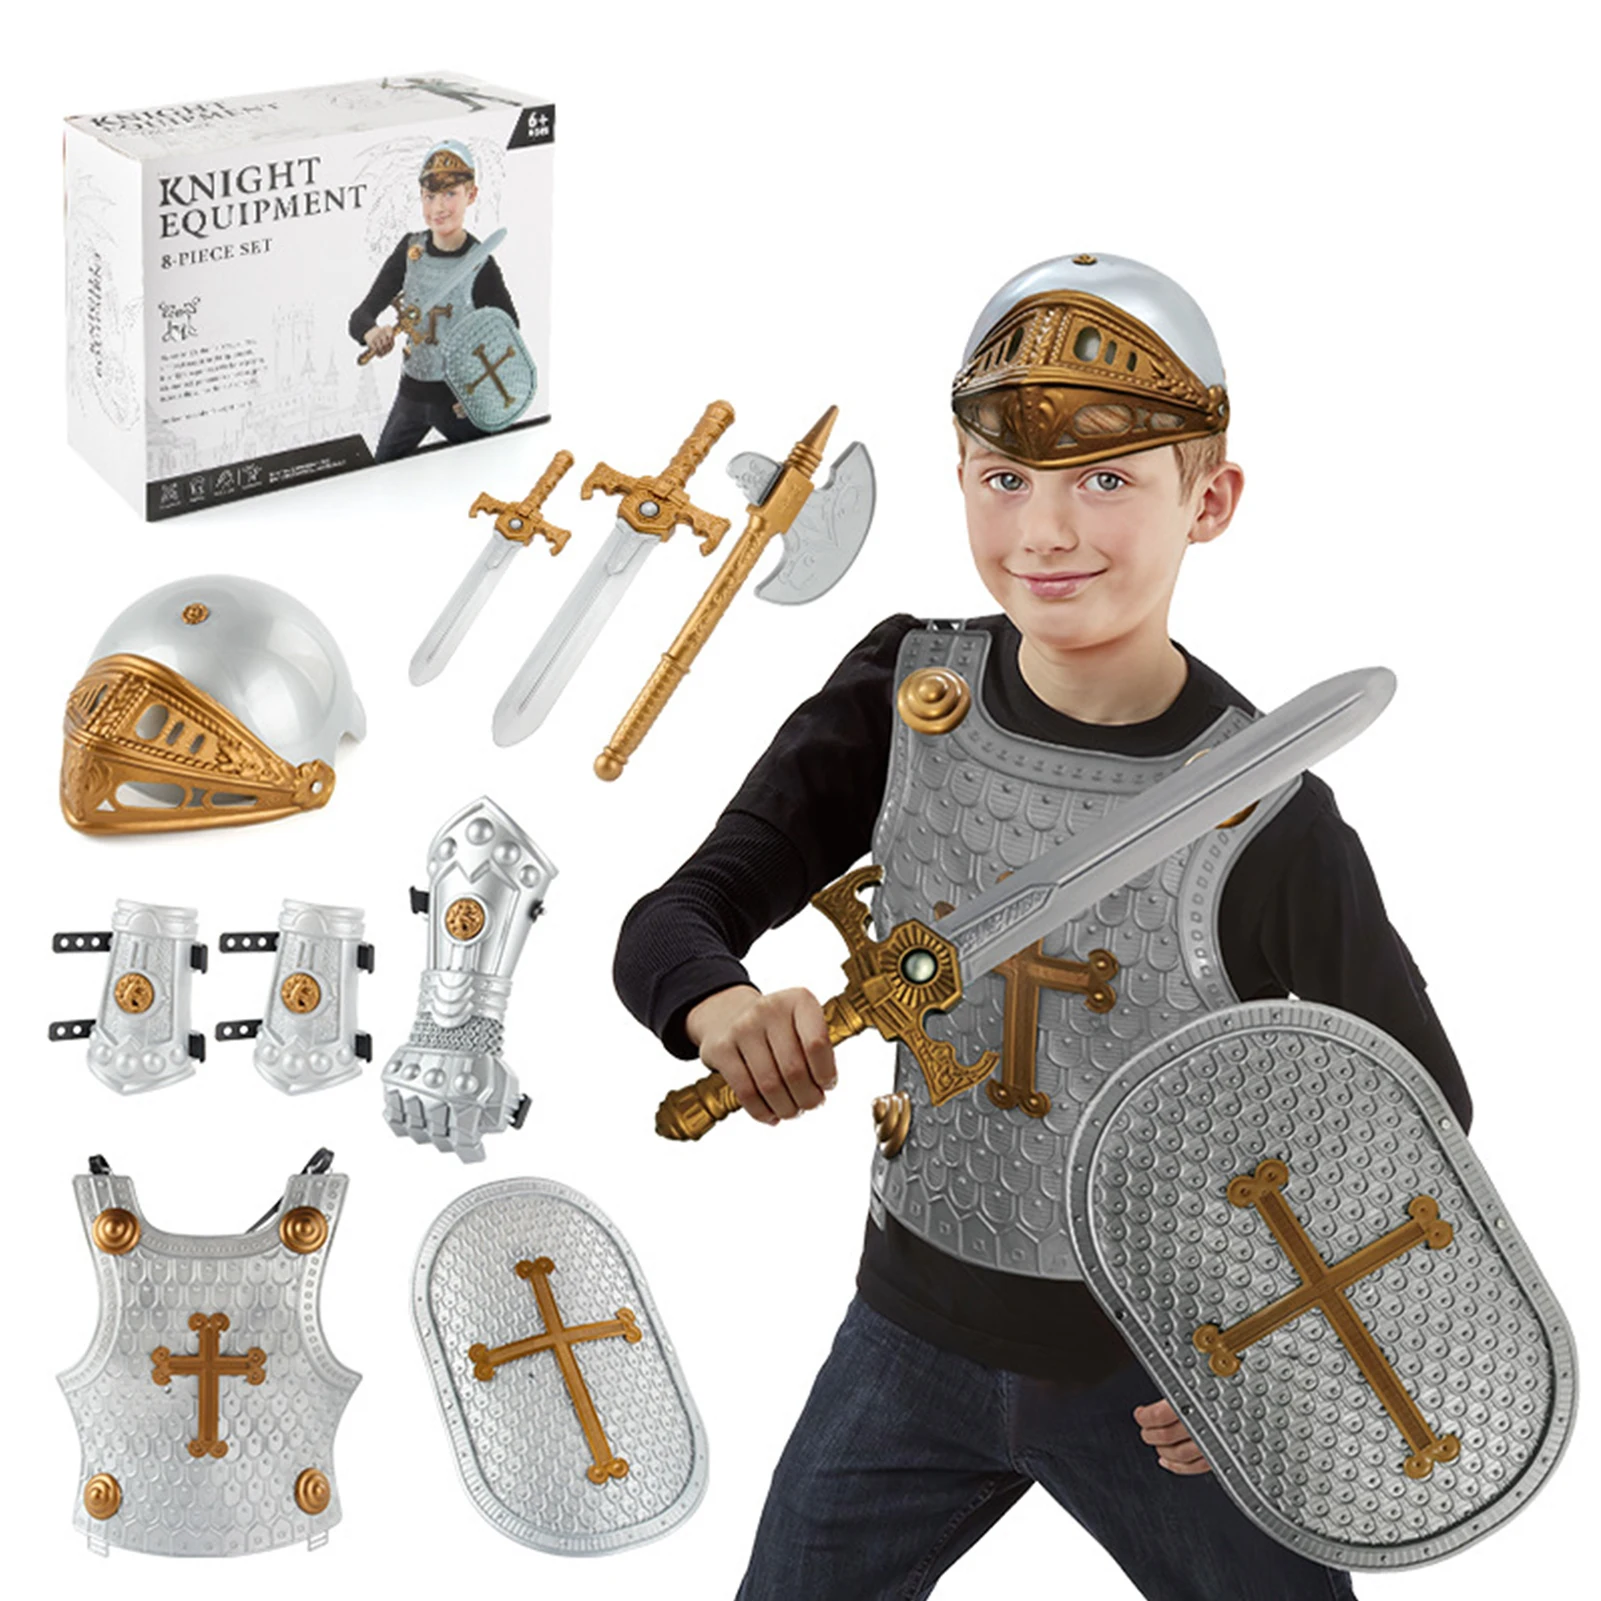 Medieval Knight in Shining Armor Pretend Role Play Plastic Toy Costume Set with Weapons and Accessories Silver 